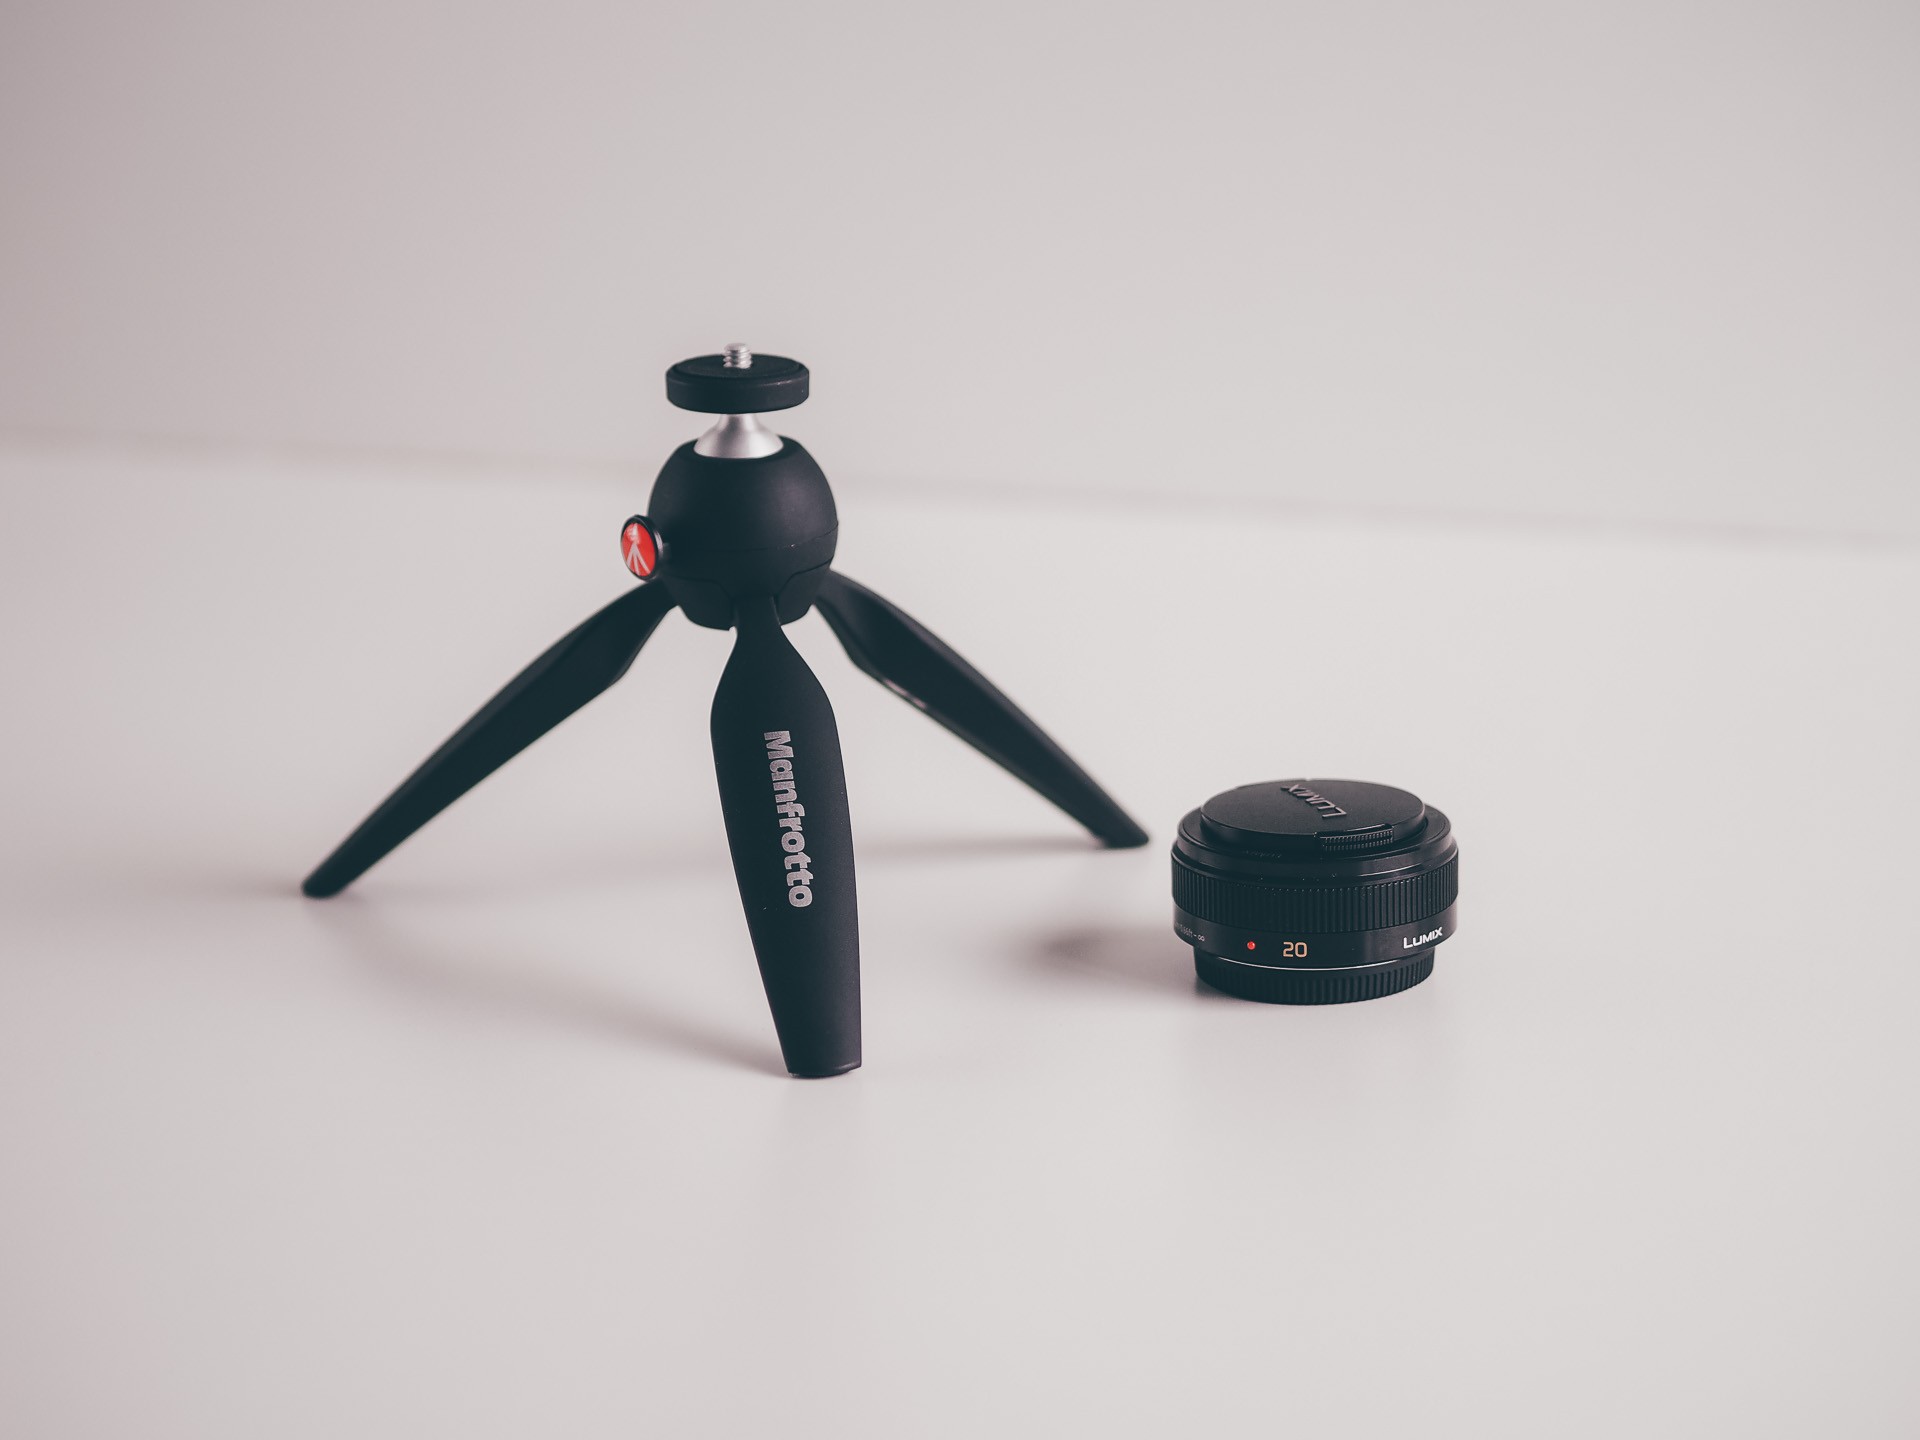 The Manfrotto logo is hard to miss on the PIXI Mini’s left leg.